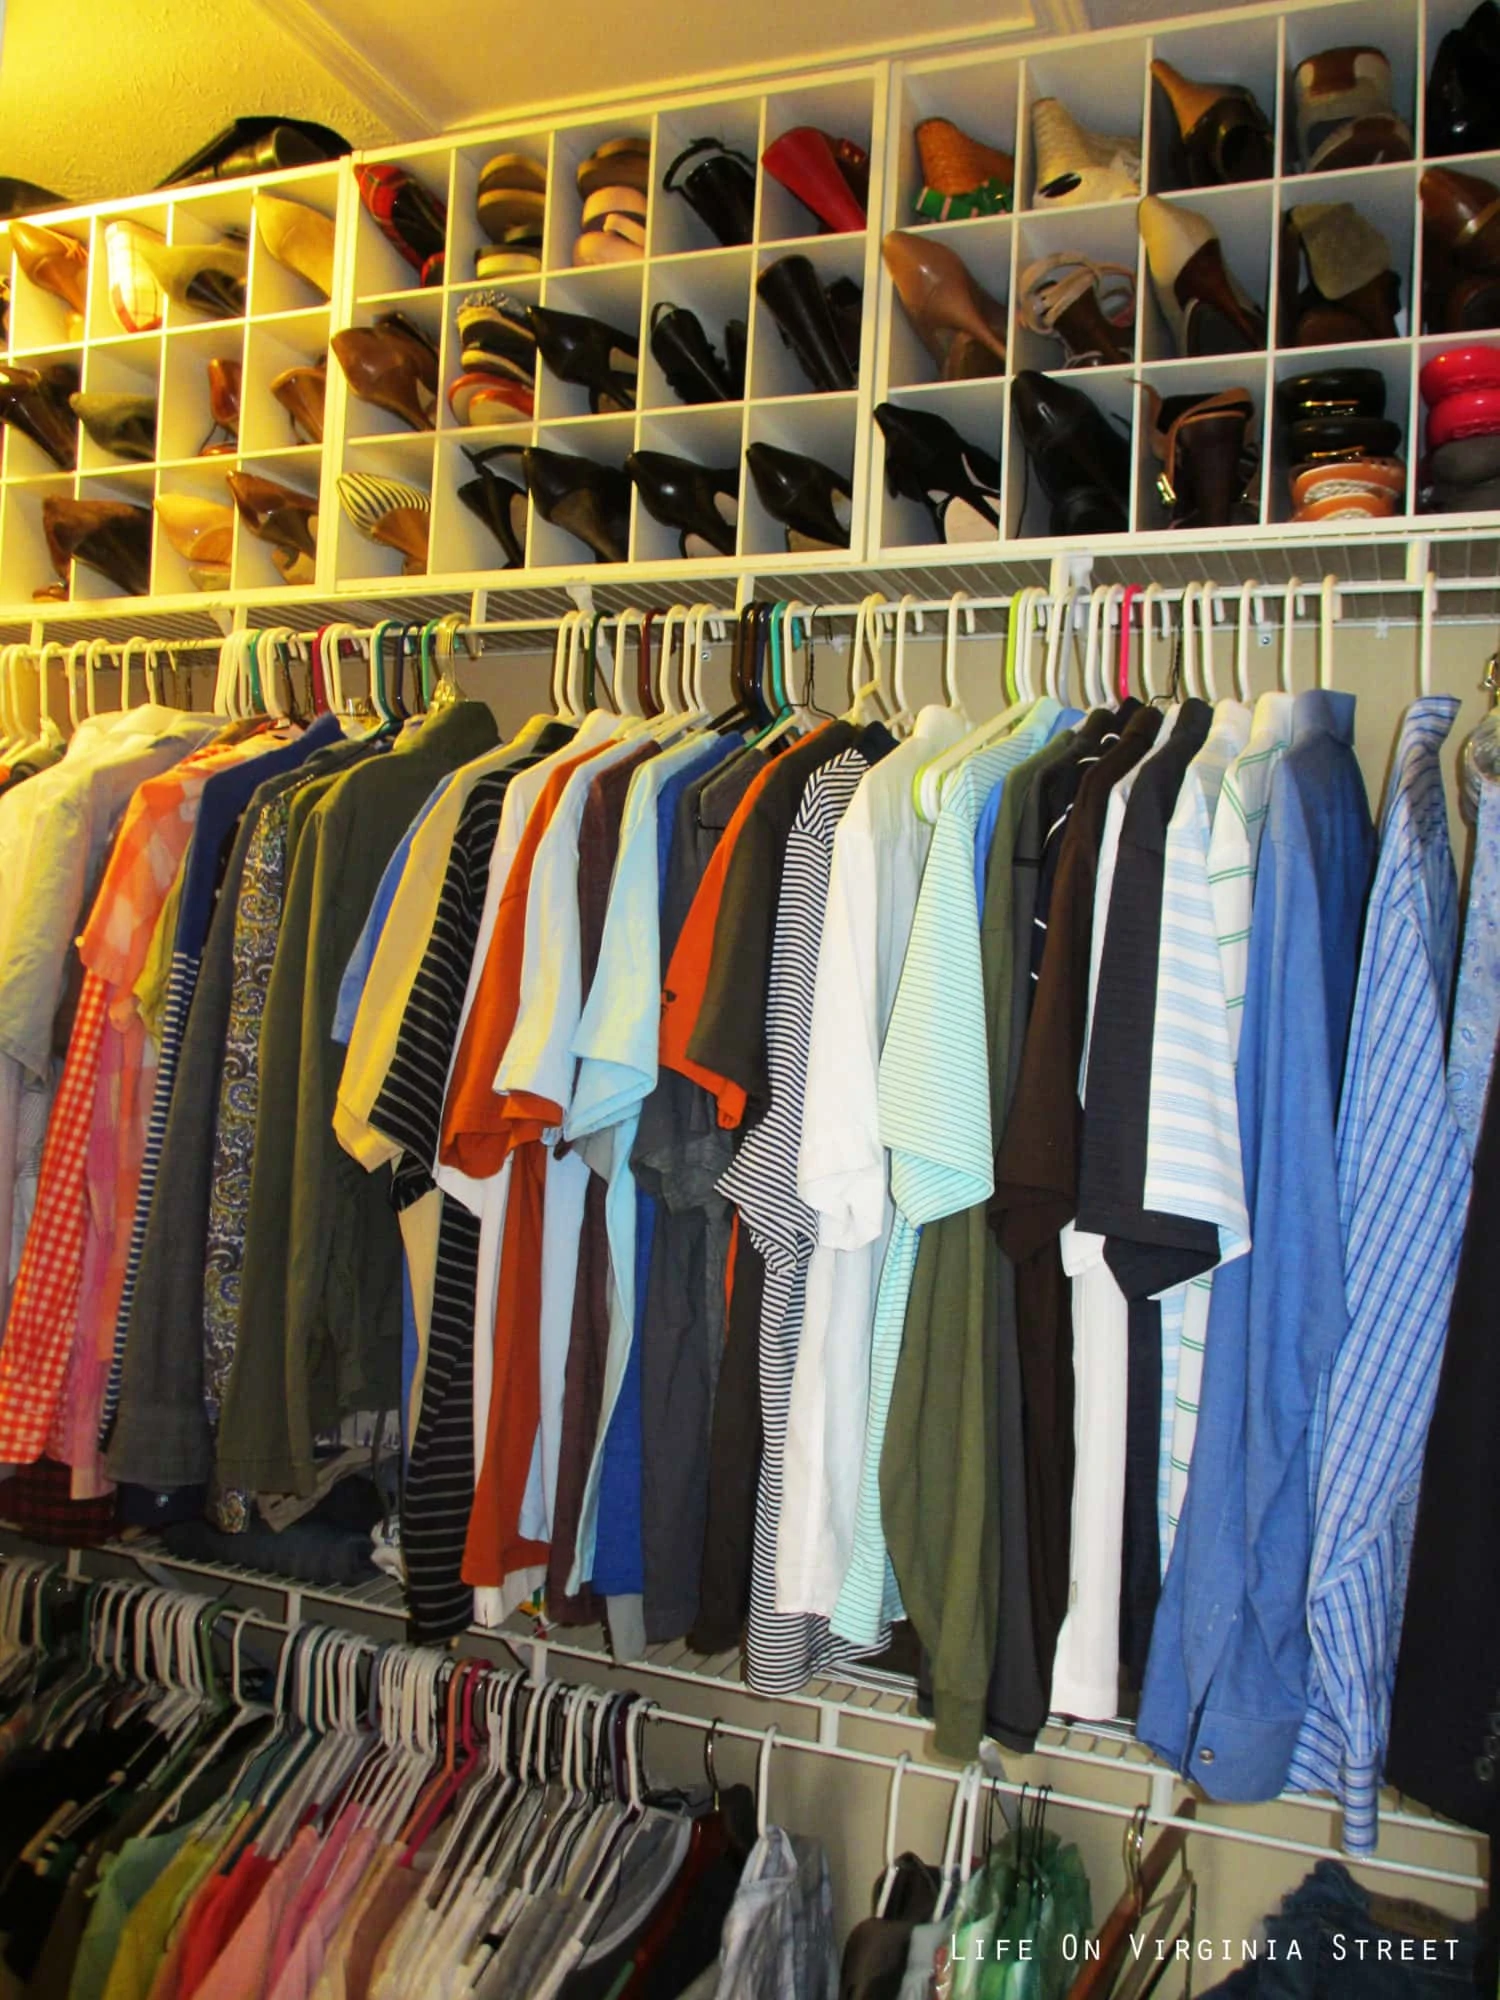 A close up picture of the shirts and shoes in the closet.